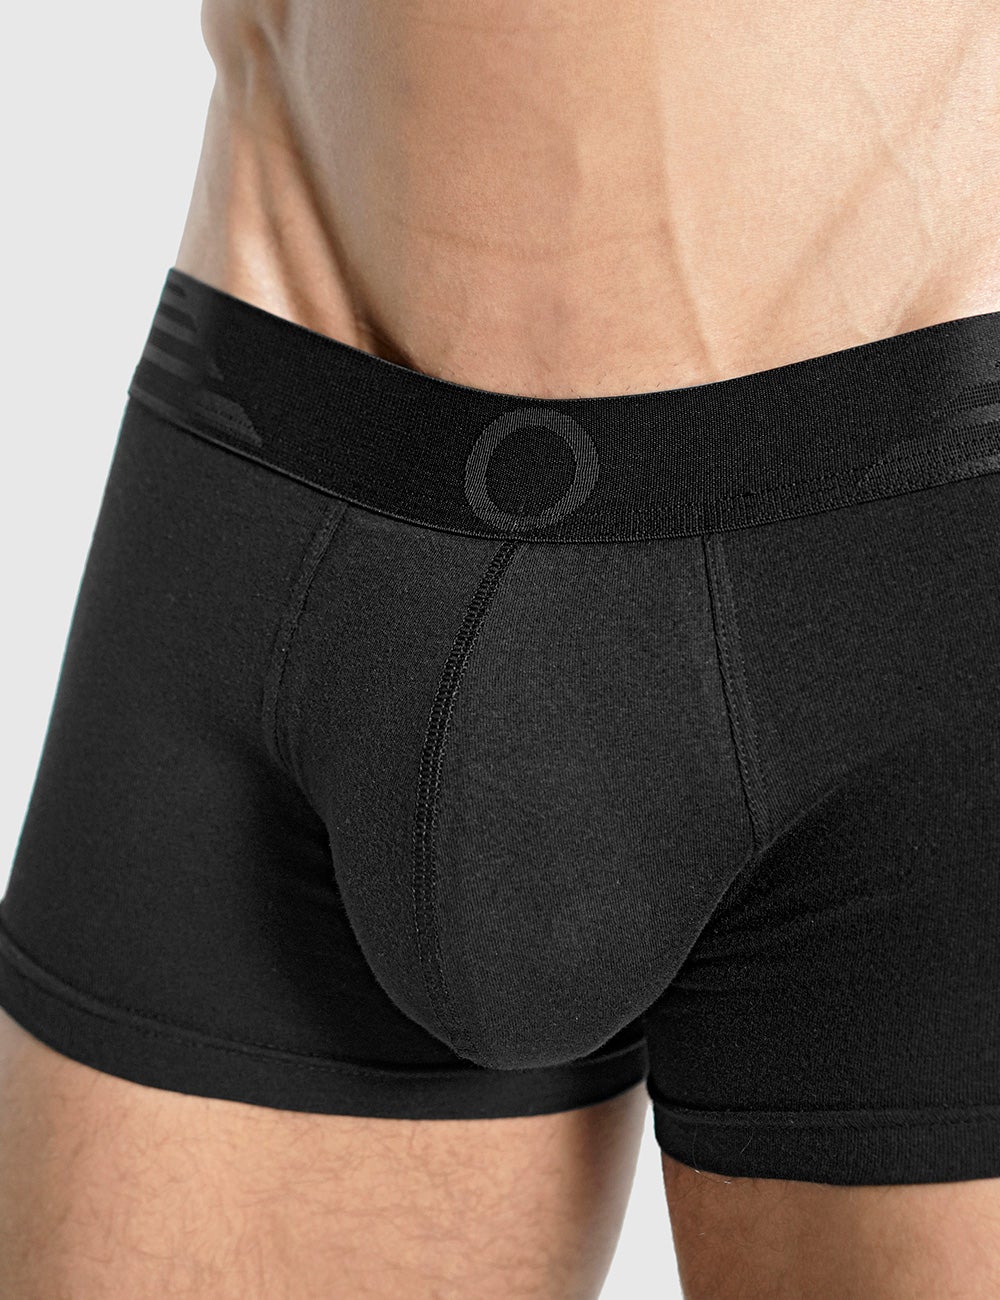 Padded Boxer Trunk + Smart Package Cup – Rounderbum Canada